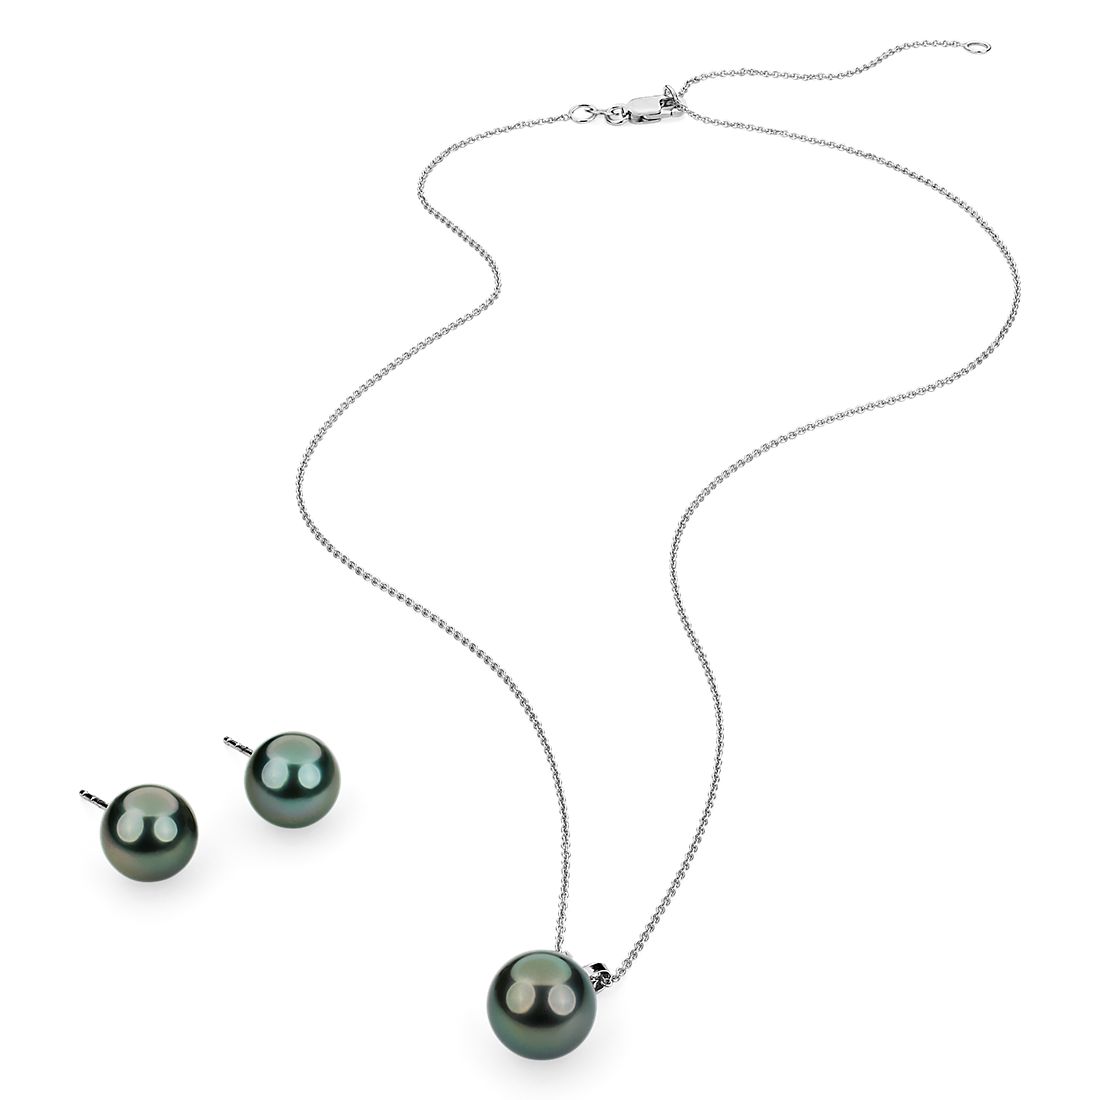 Tahitian Pearl Pendant and Earring Set in 14k White Gold (9.5-10mm)